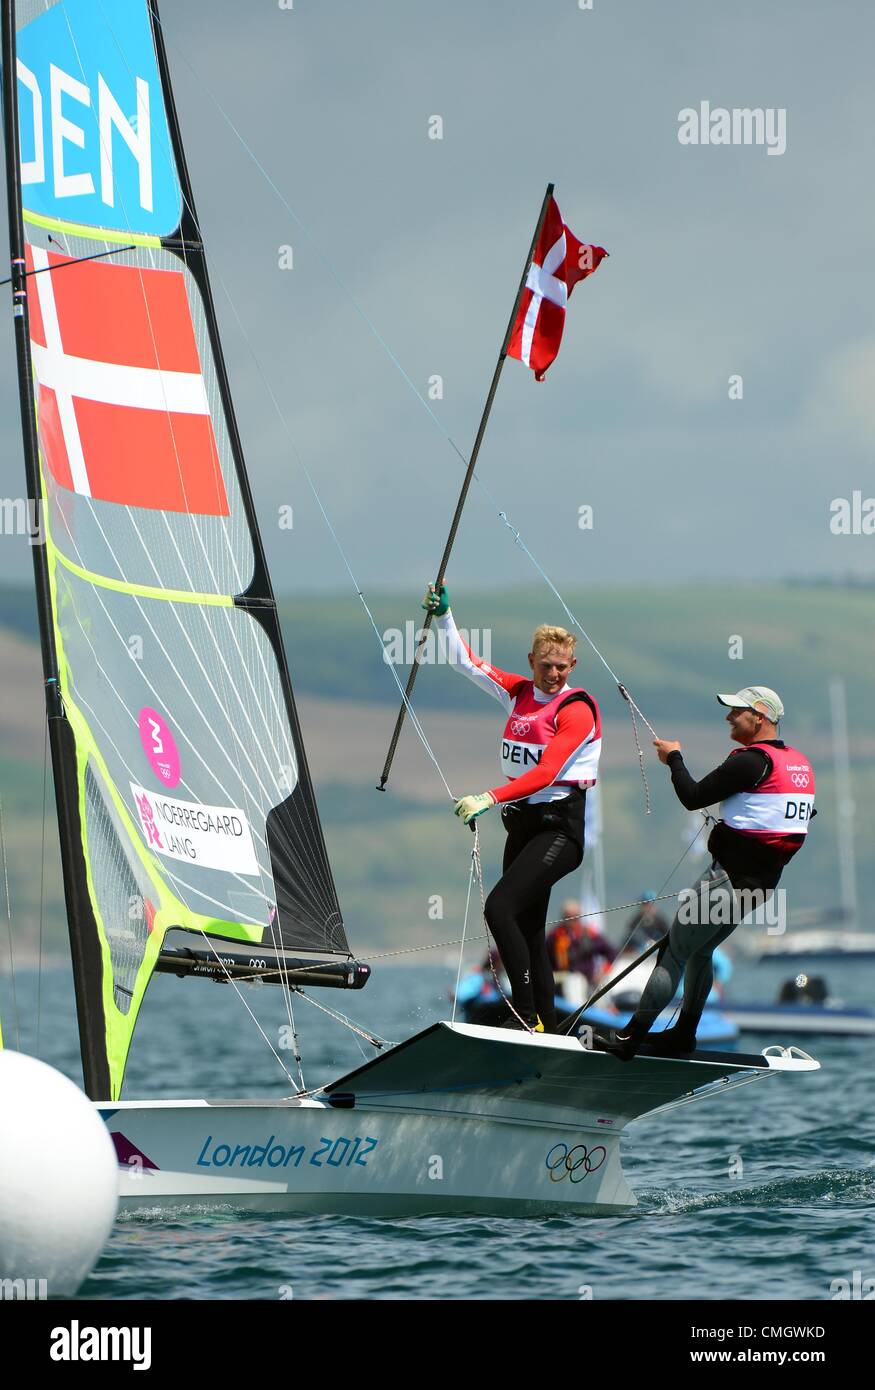 Olympic Sailing, action during the London 2012 Olympic Games at the Weymouth & Portland Venue, Dorset, Britain, UK.  Allan Norregaard and Peter Lang of Denmark win bronze in the 49er Men's skiff medal race August 8th, 2012 Stock Photo